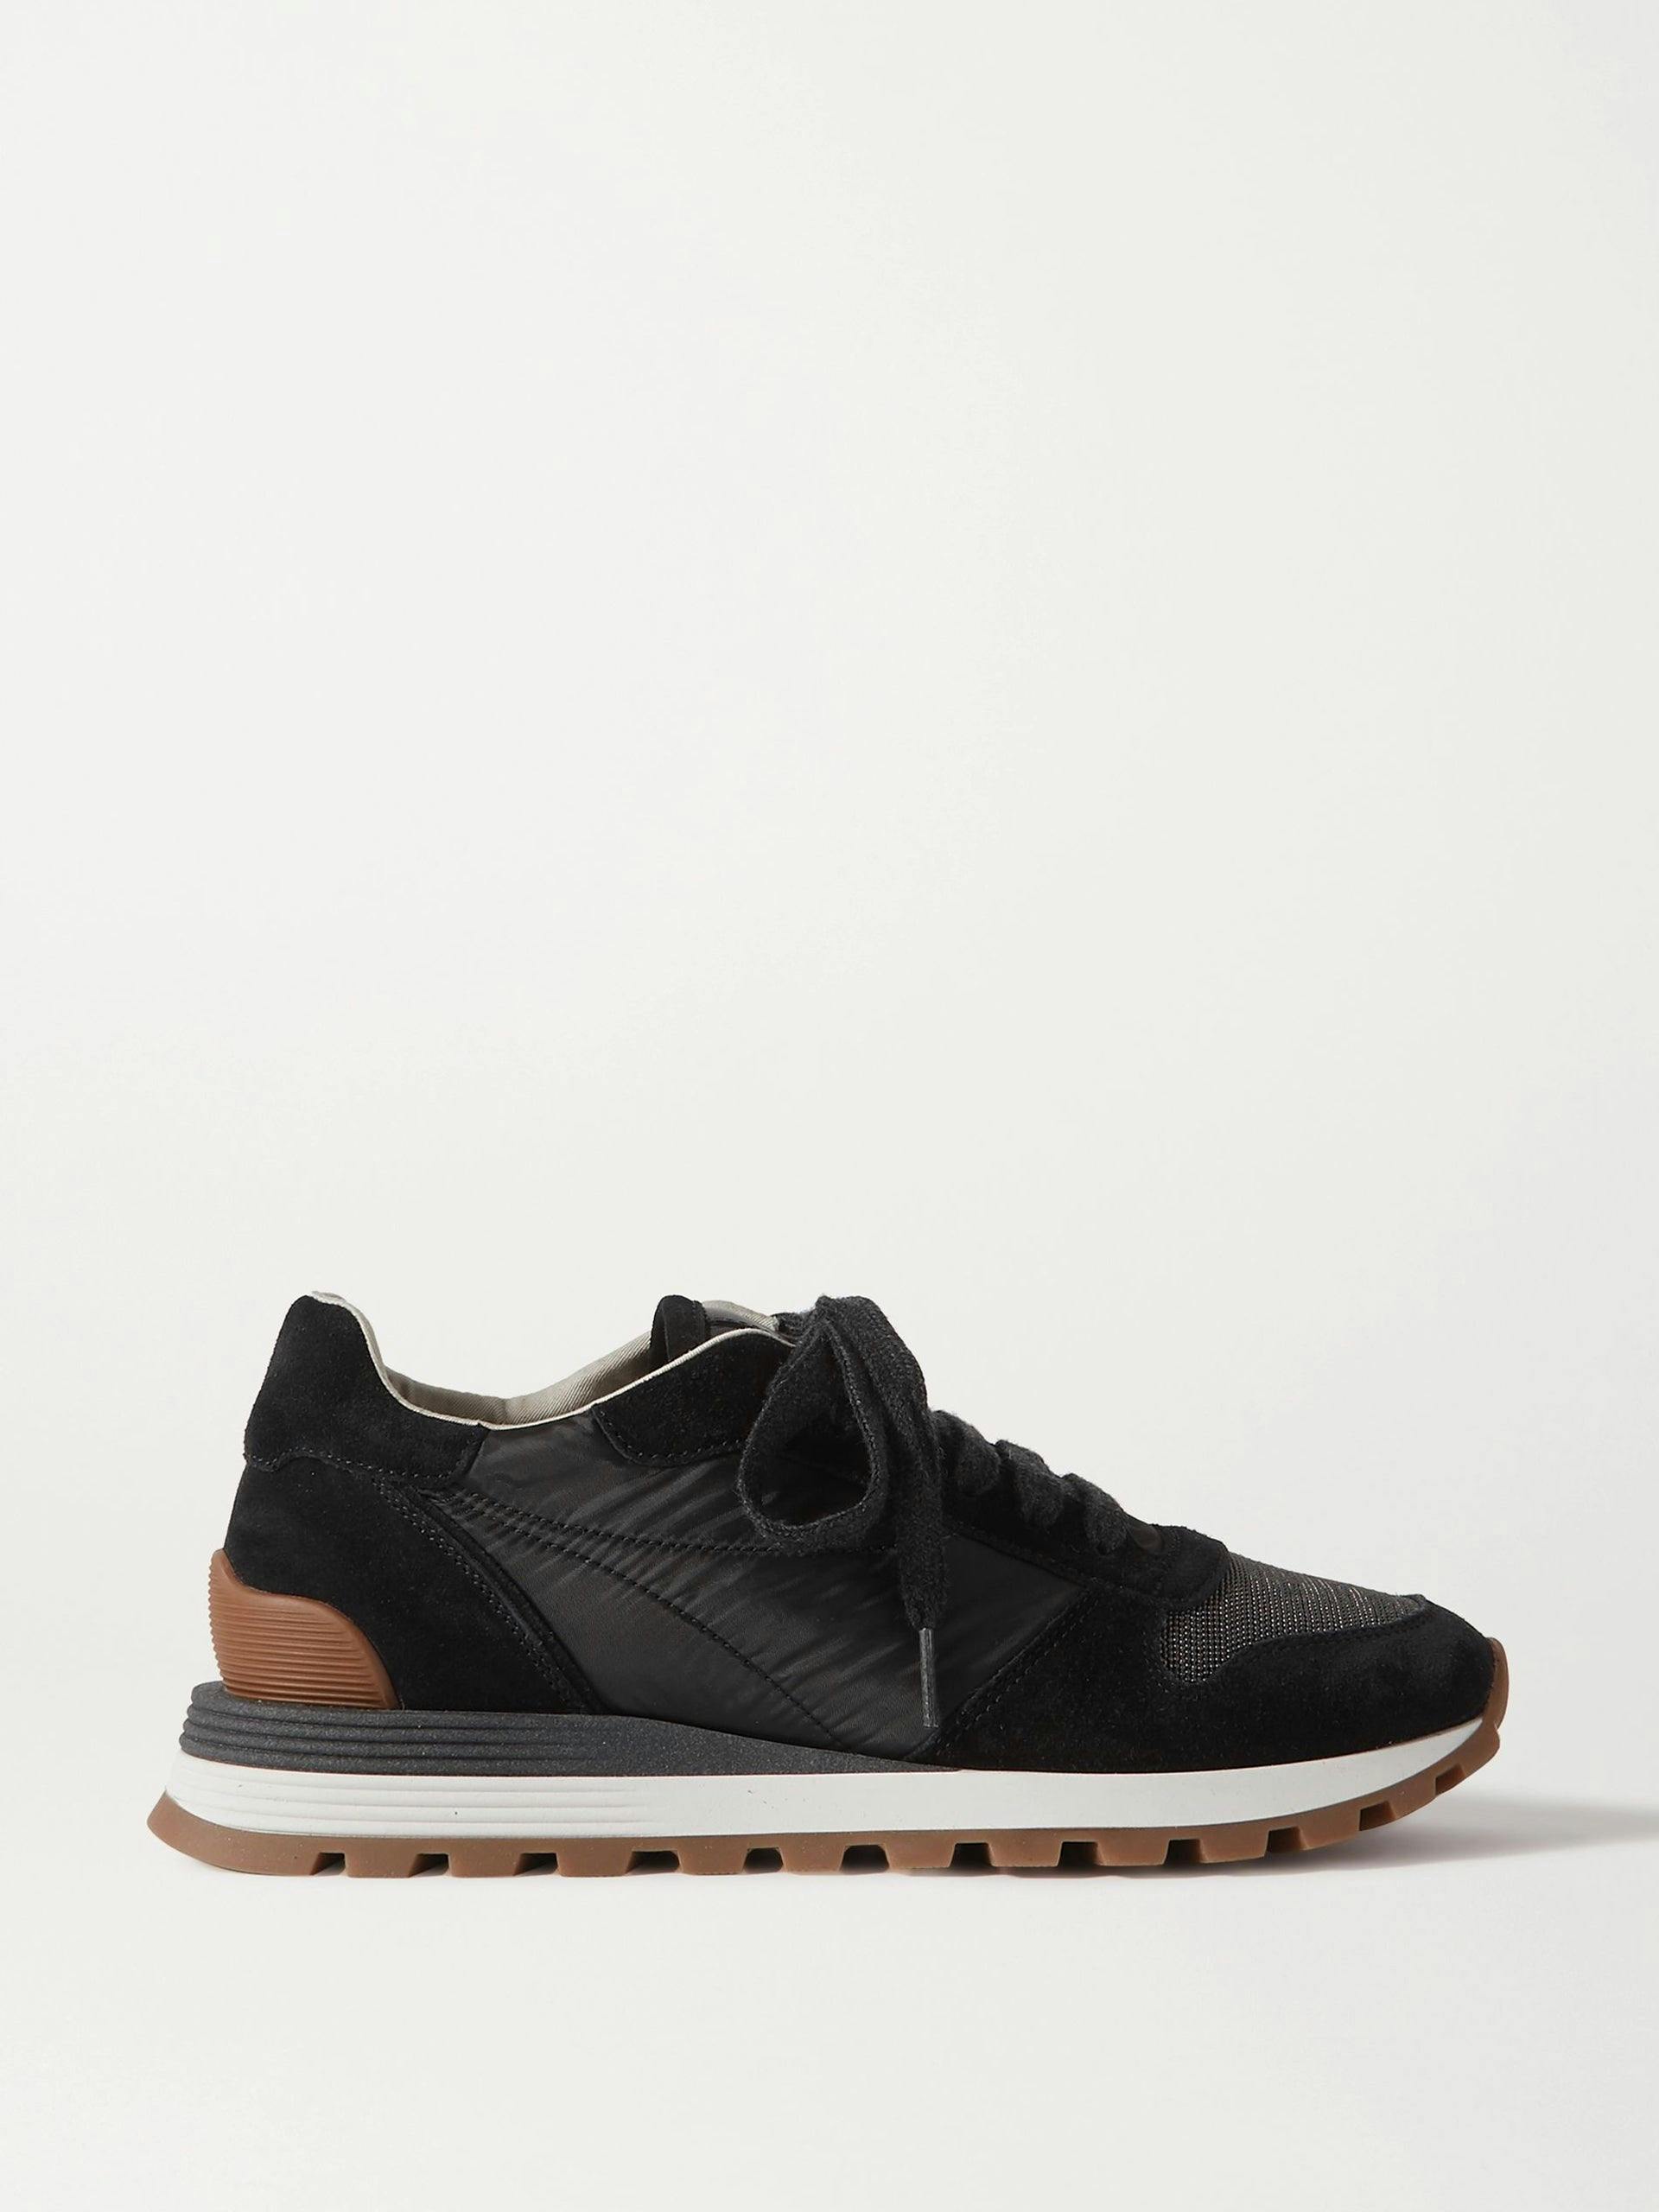 Black nylon and suede sneakers